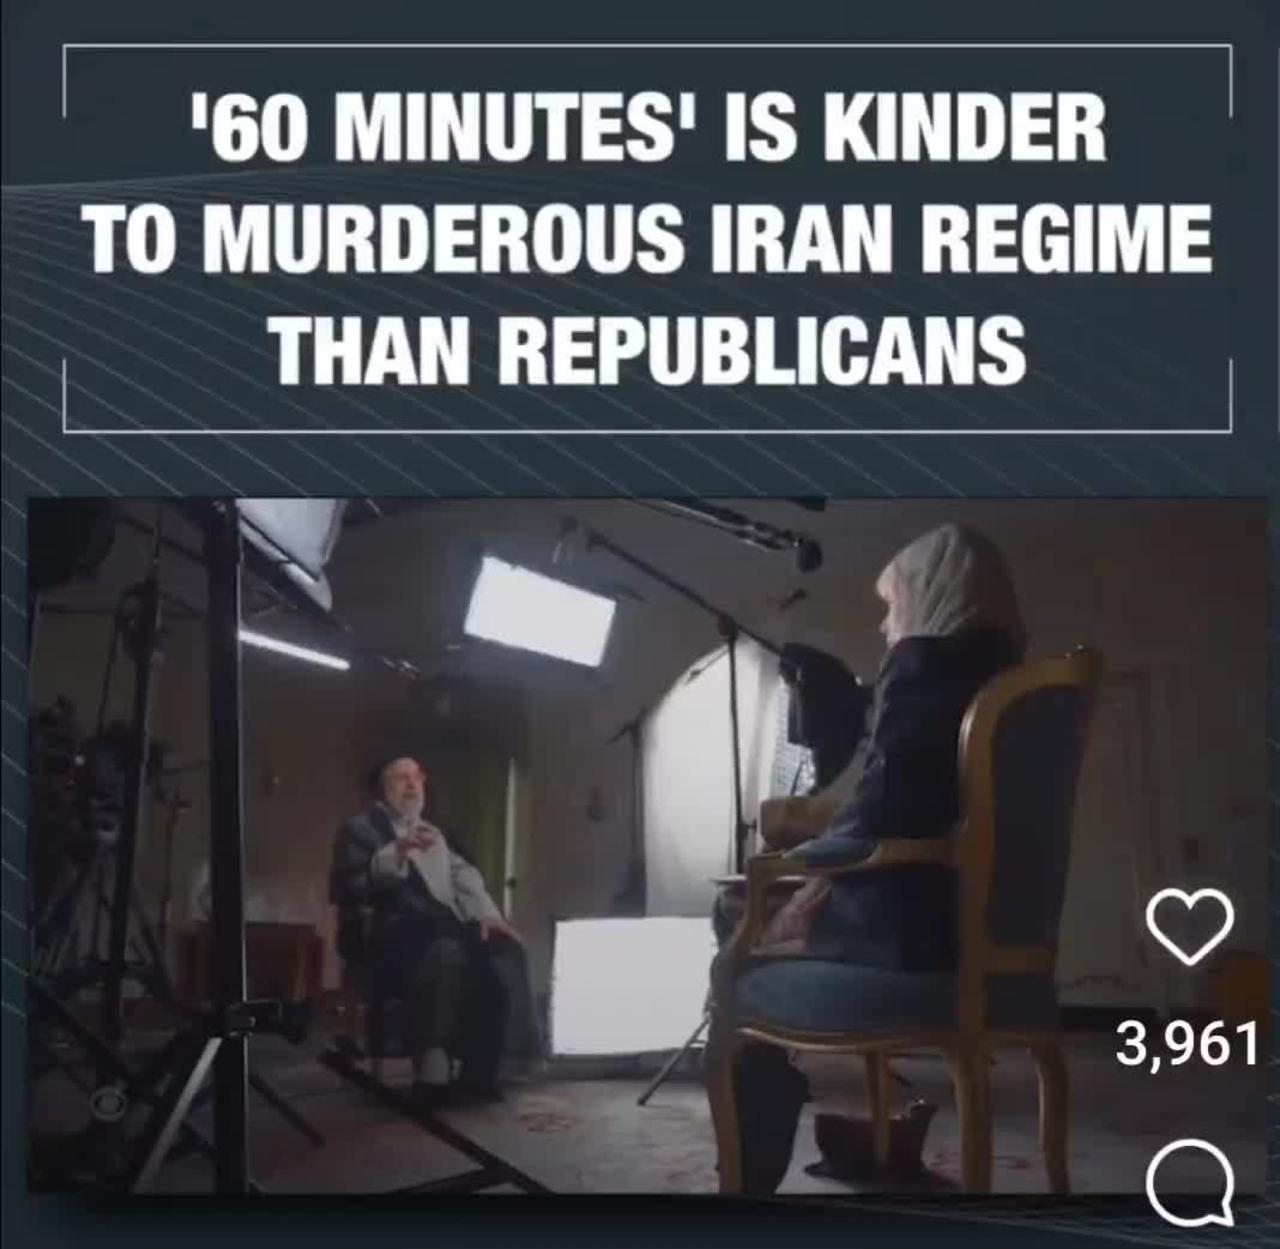 60 MINUTES' IS KINDER TO MURDEROUS IRAN REGIME THAN REPUBLICANS